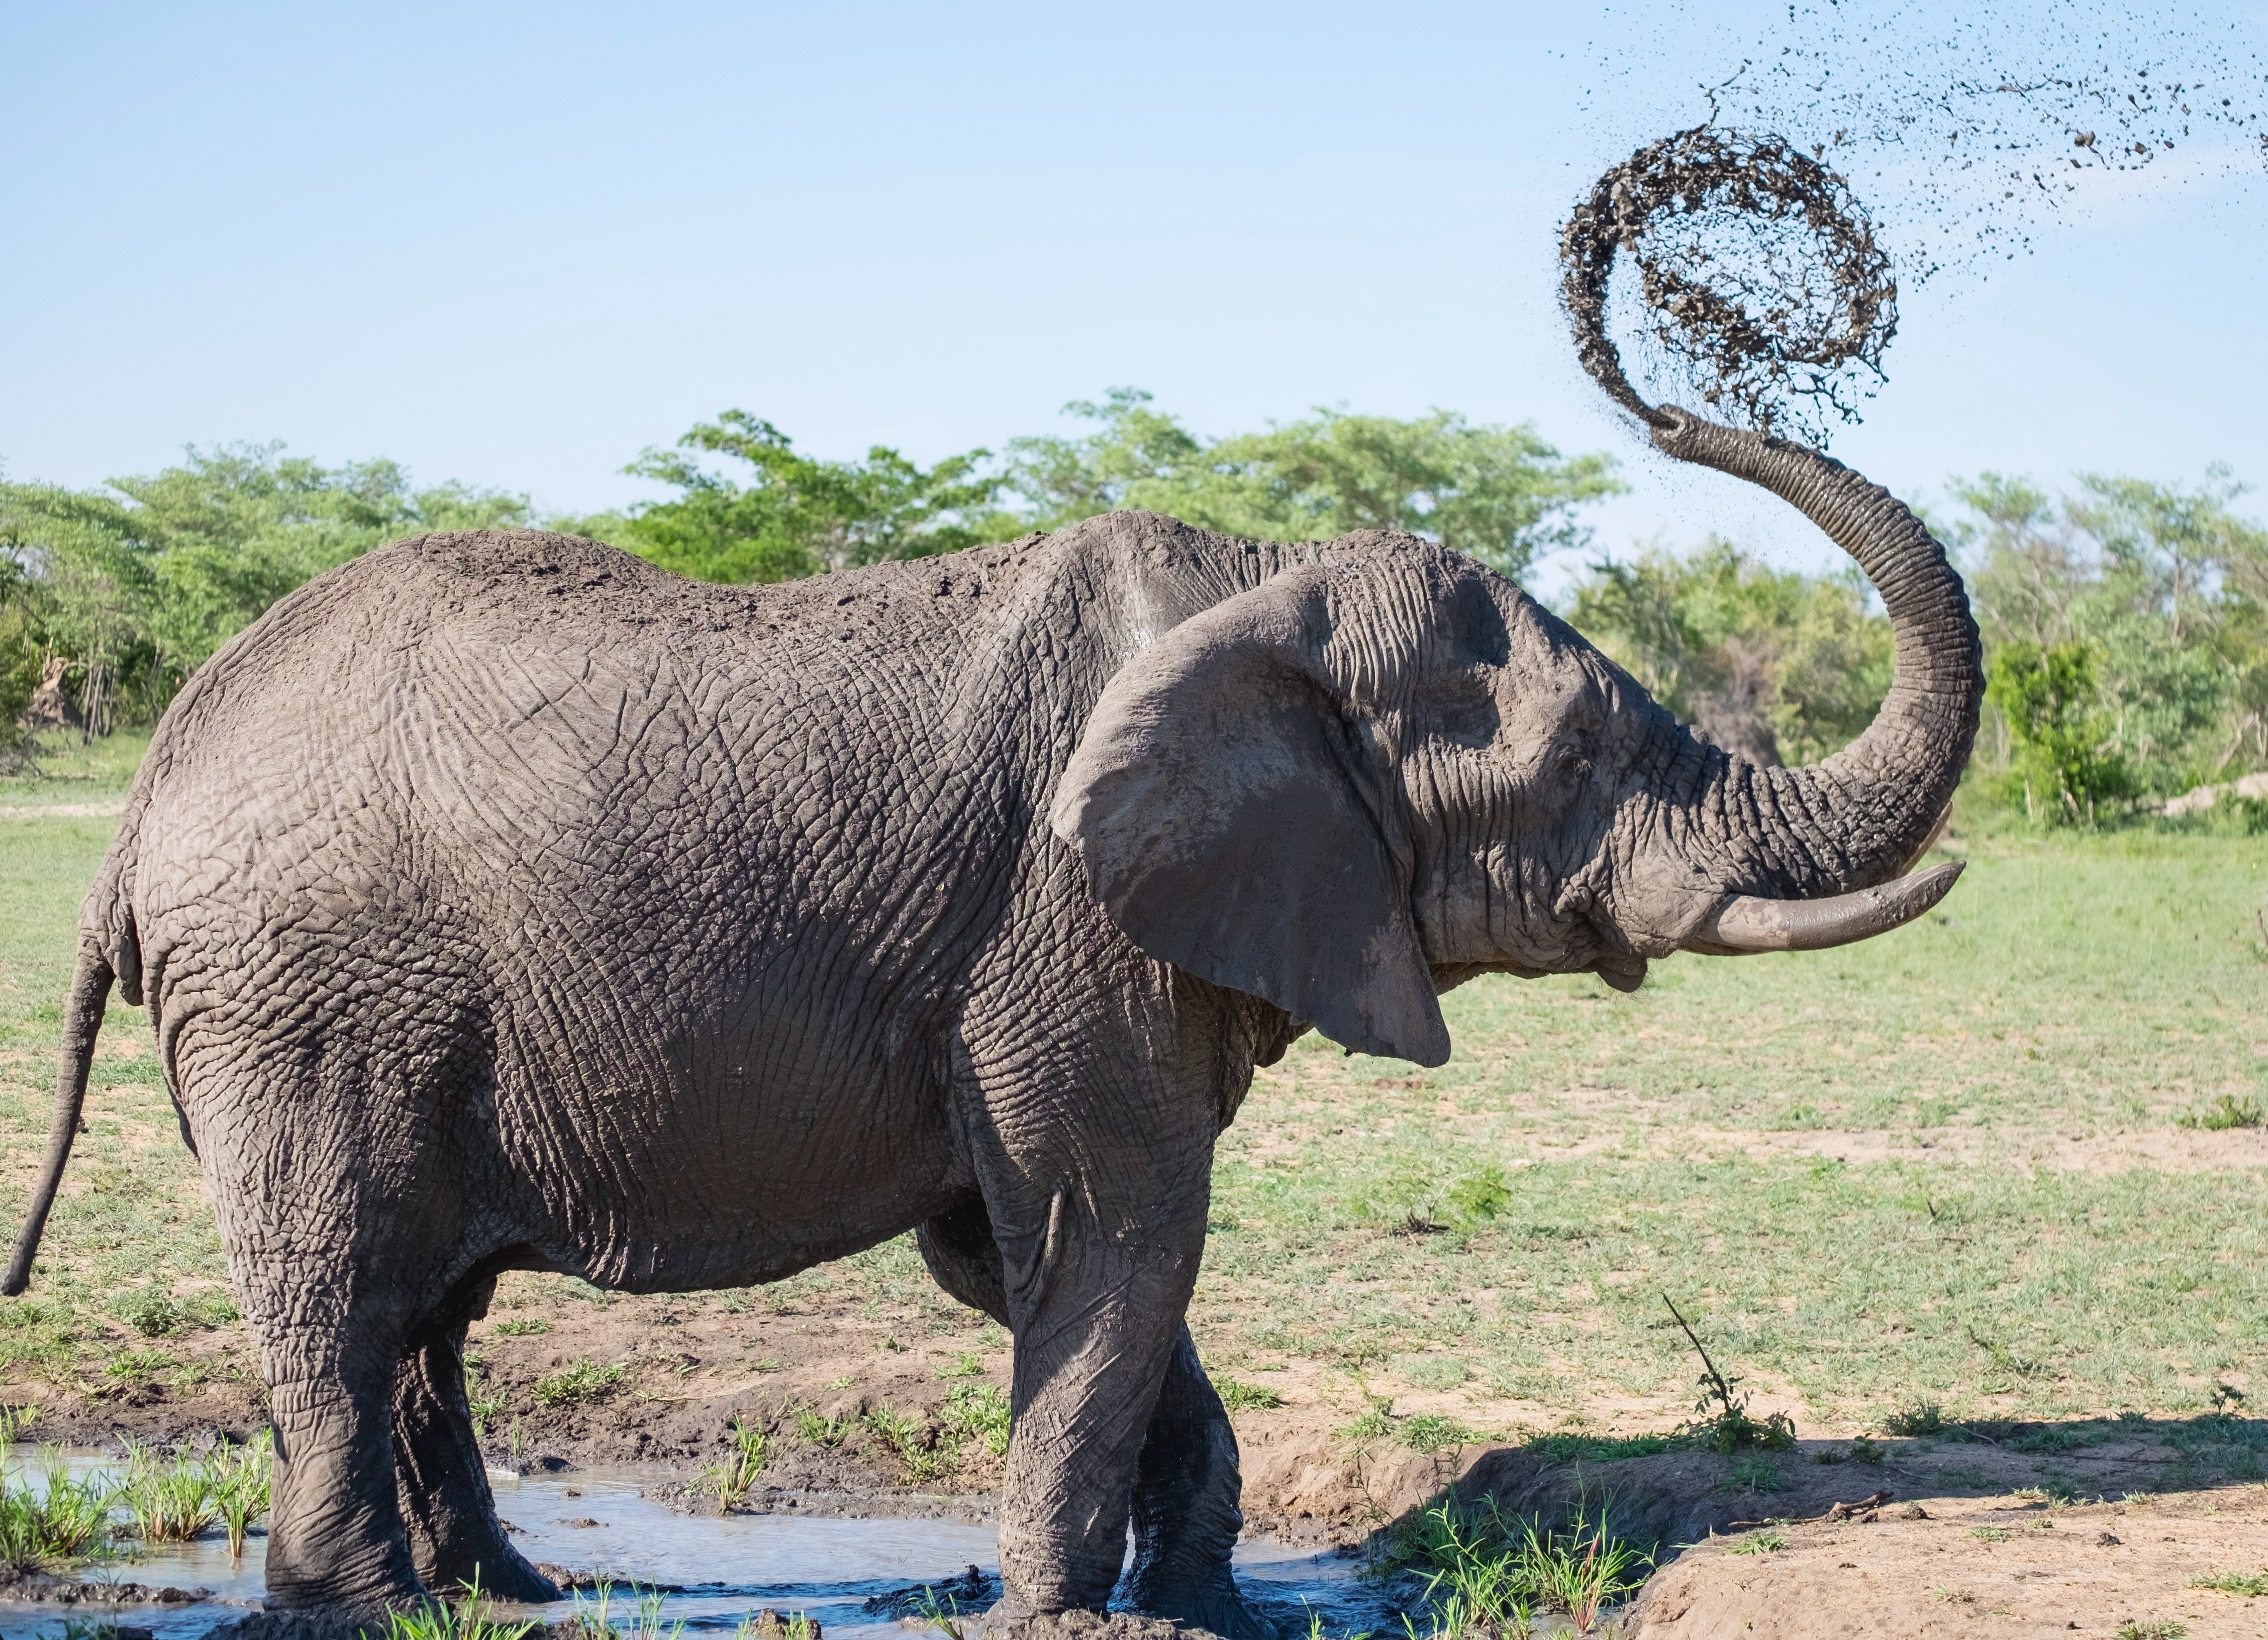 Elephant spraying food in a spiral pattern in the air with his trunk.